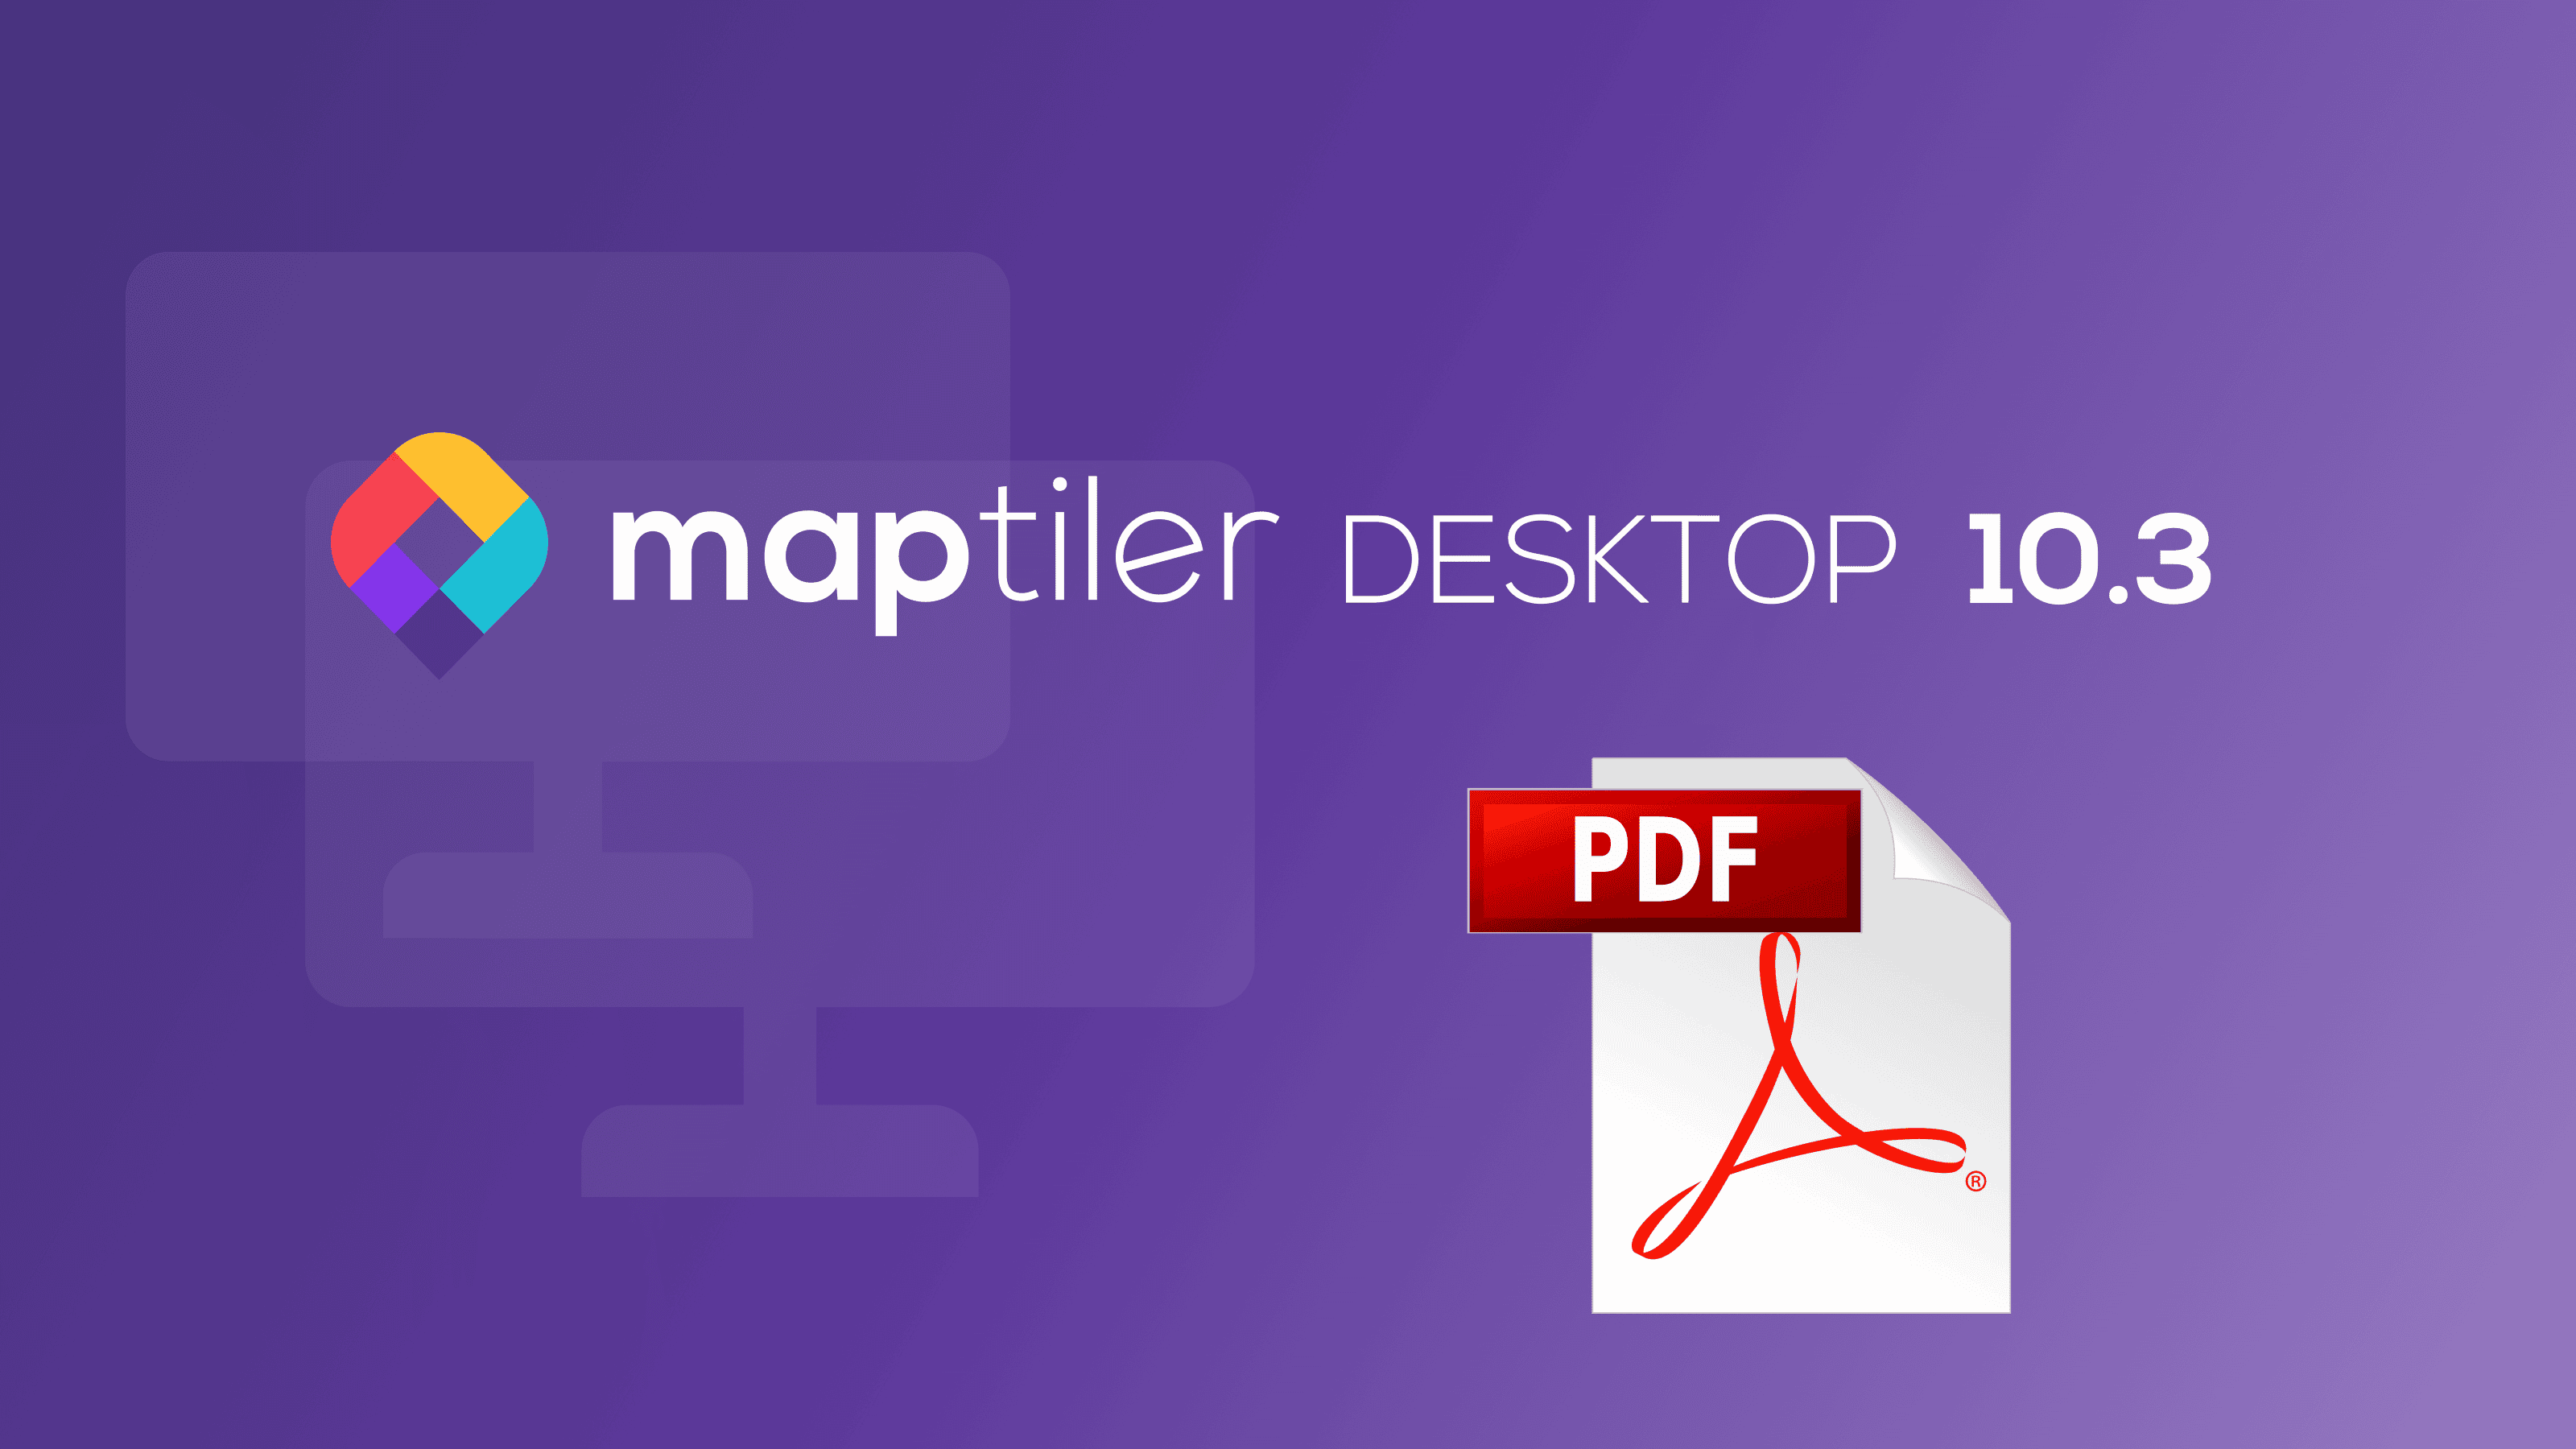 MapTiler Engine 10.3 with PDF support